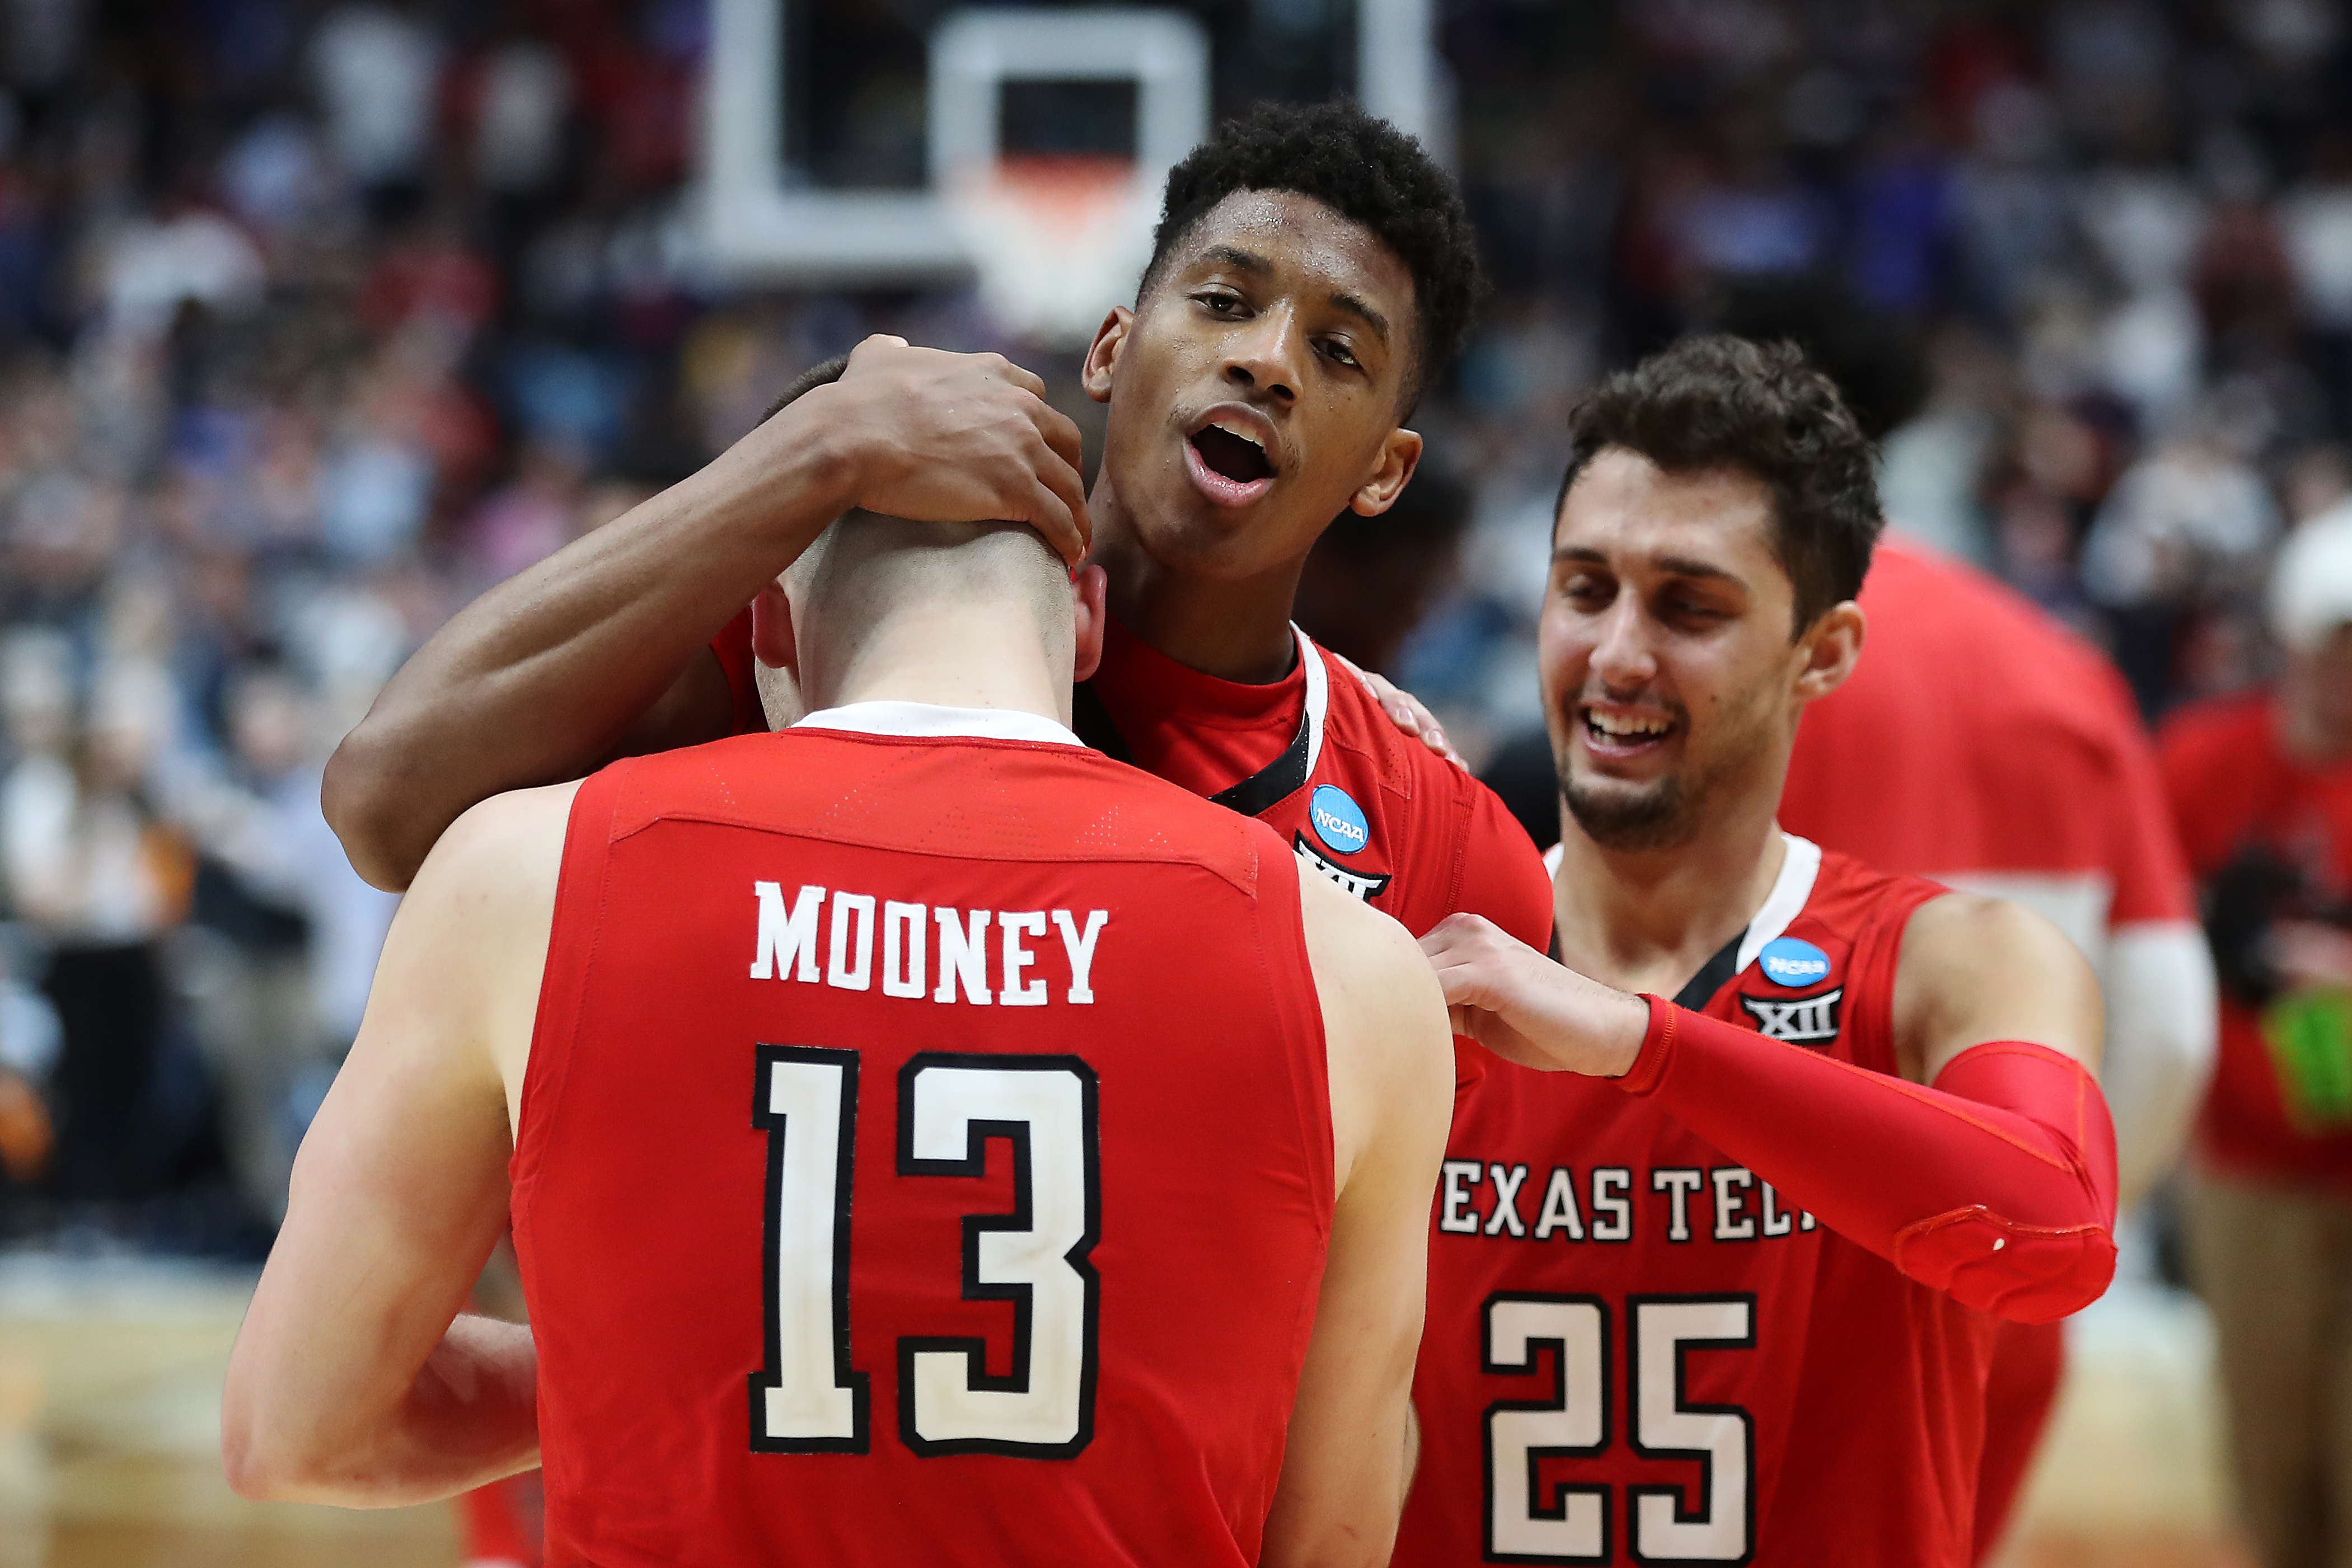 Highlight: Final Call as Texas Tech advances to the National Championship Game with a 61-51 win over Michigan State